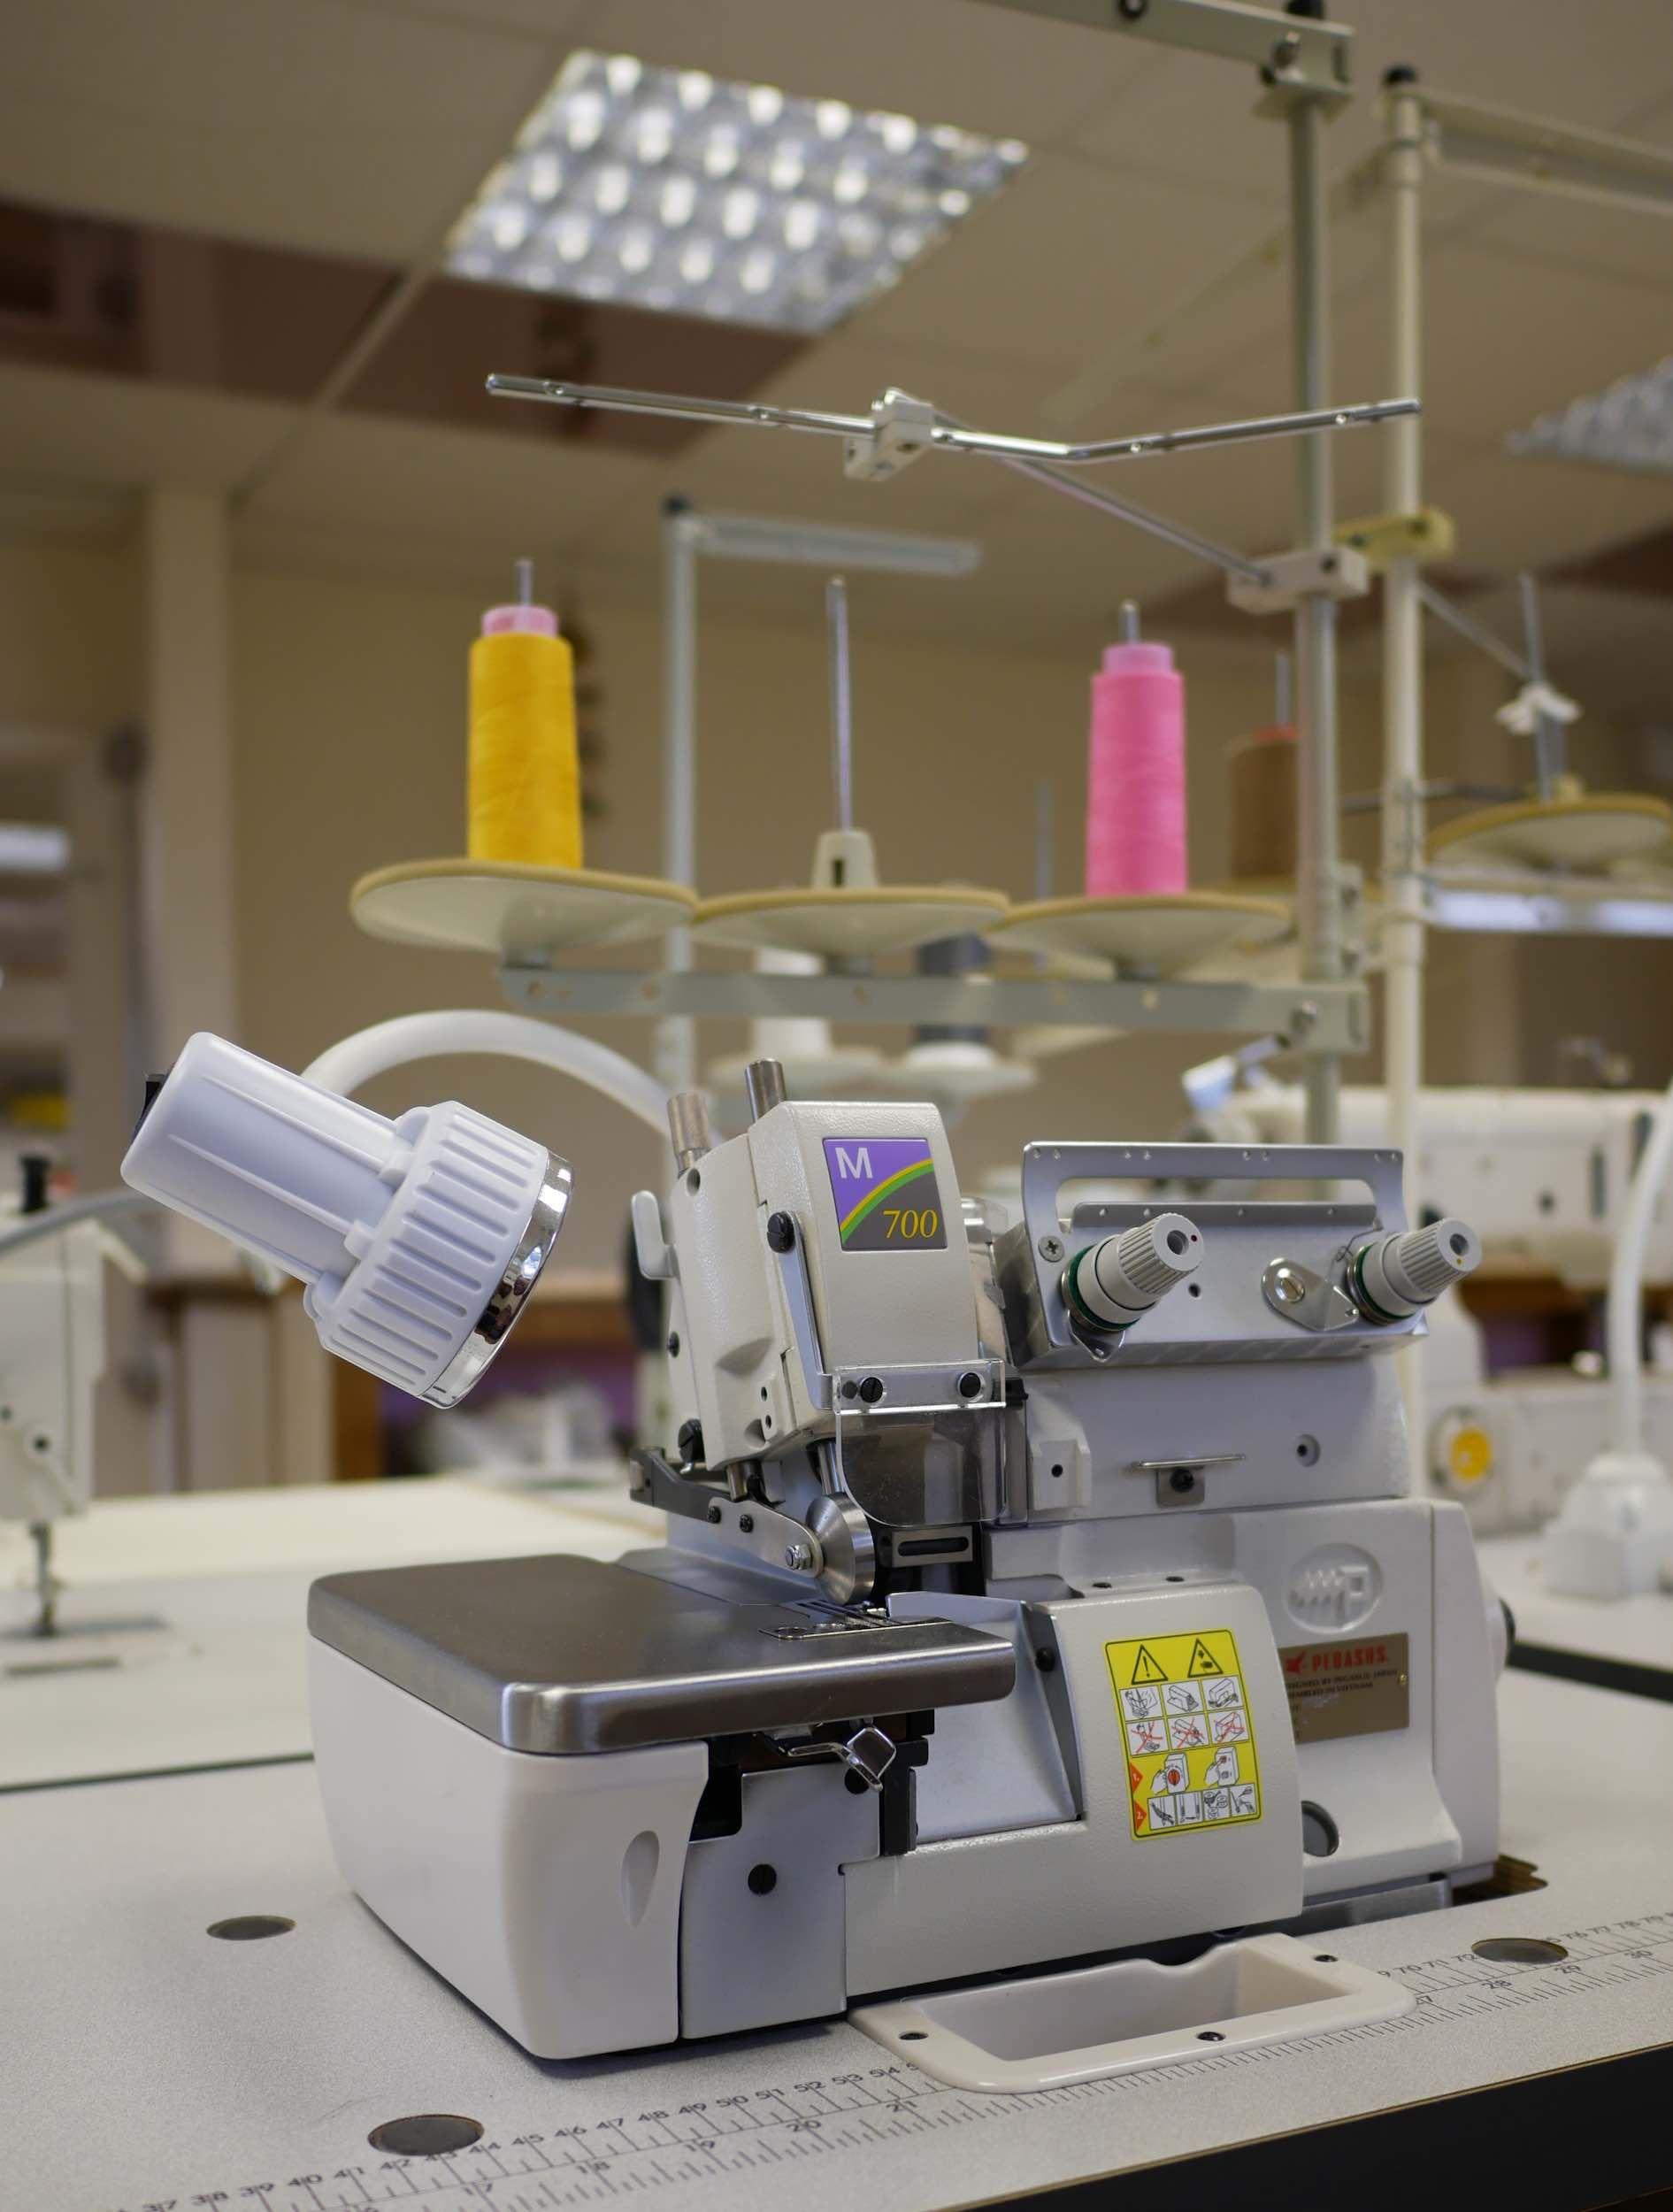 Sew Quick - Industrial Sewing Machine Suppliers UK